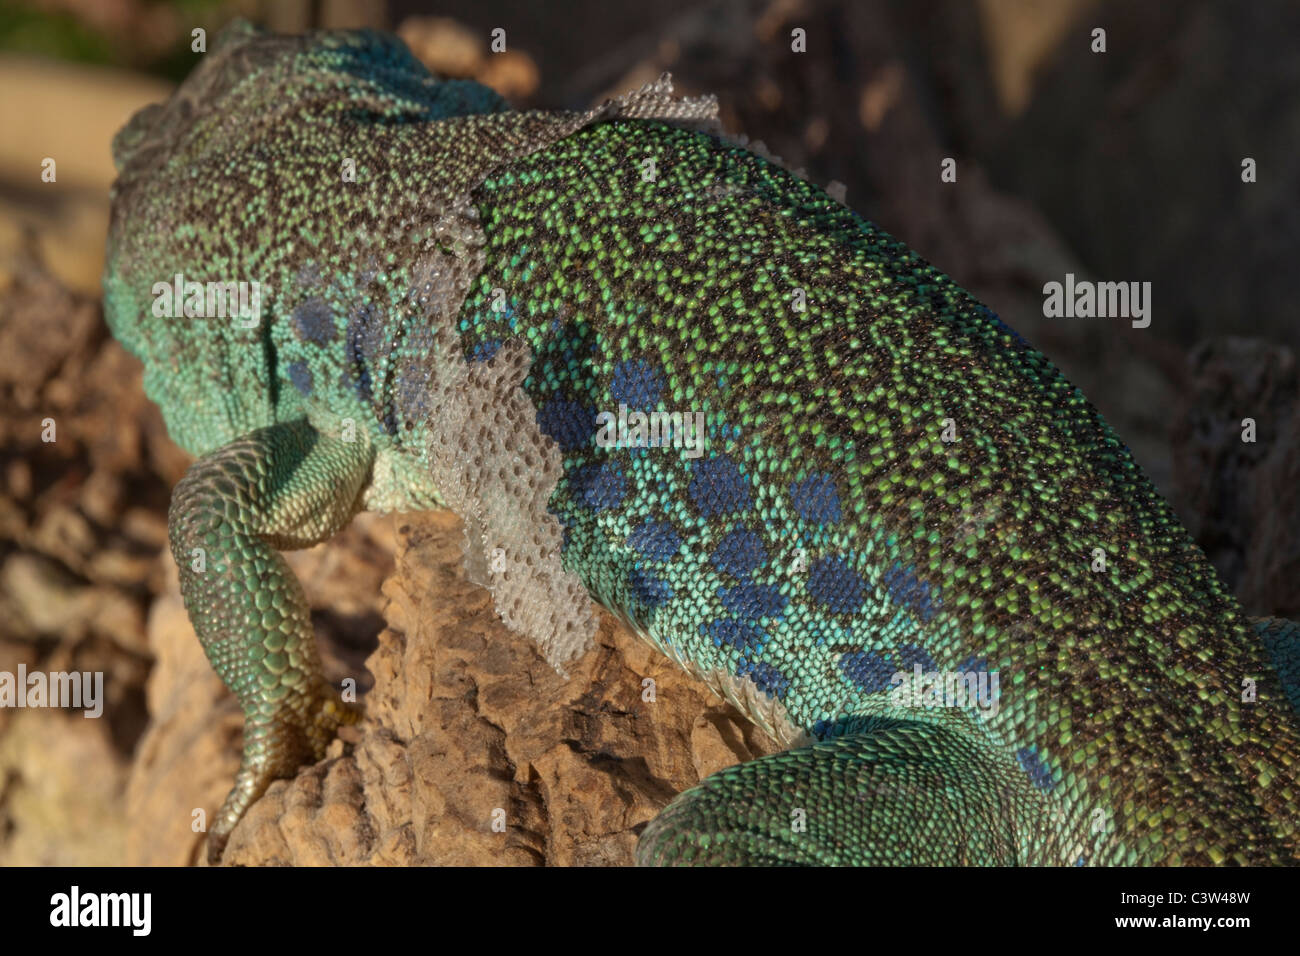 European Ocellated or Eyed Lizard (Timon lepidus). Showing sloughing of skin in pieces on flank of body. Stock Photo